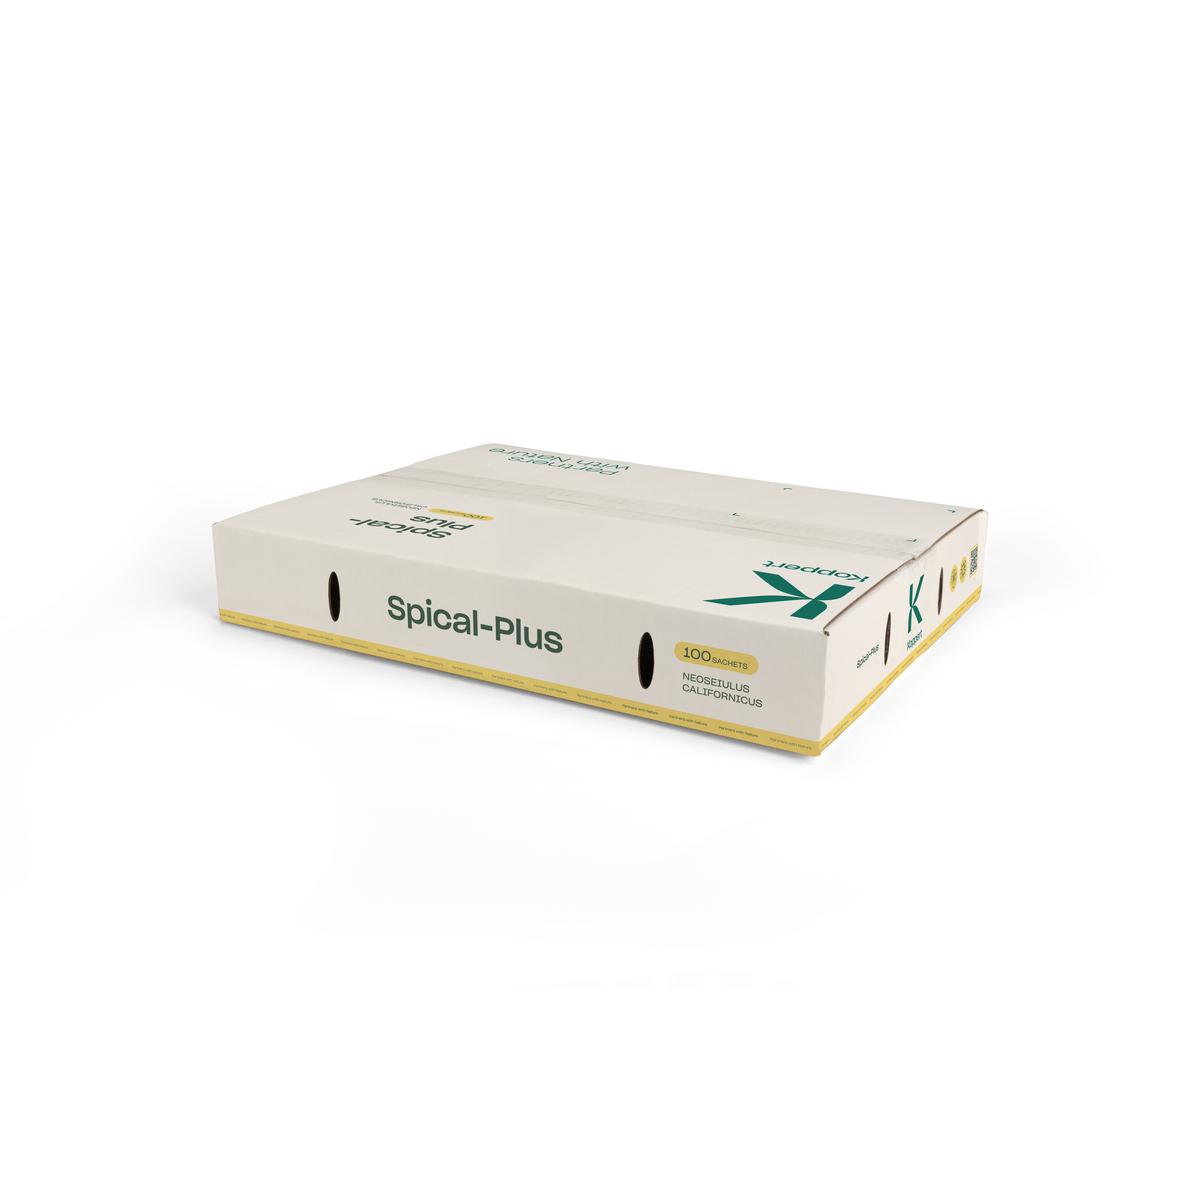 Smaller sized white box of spical plus